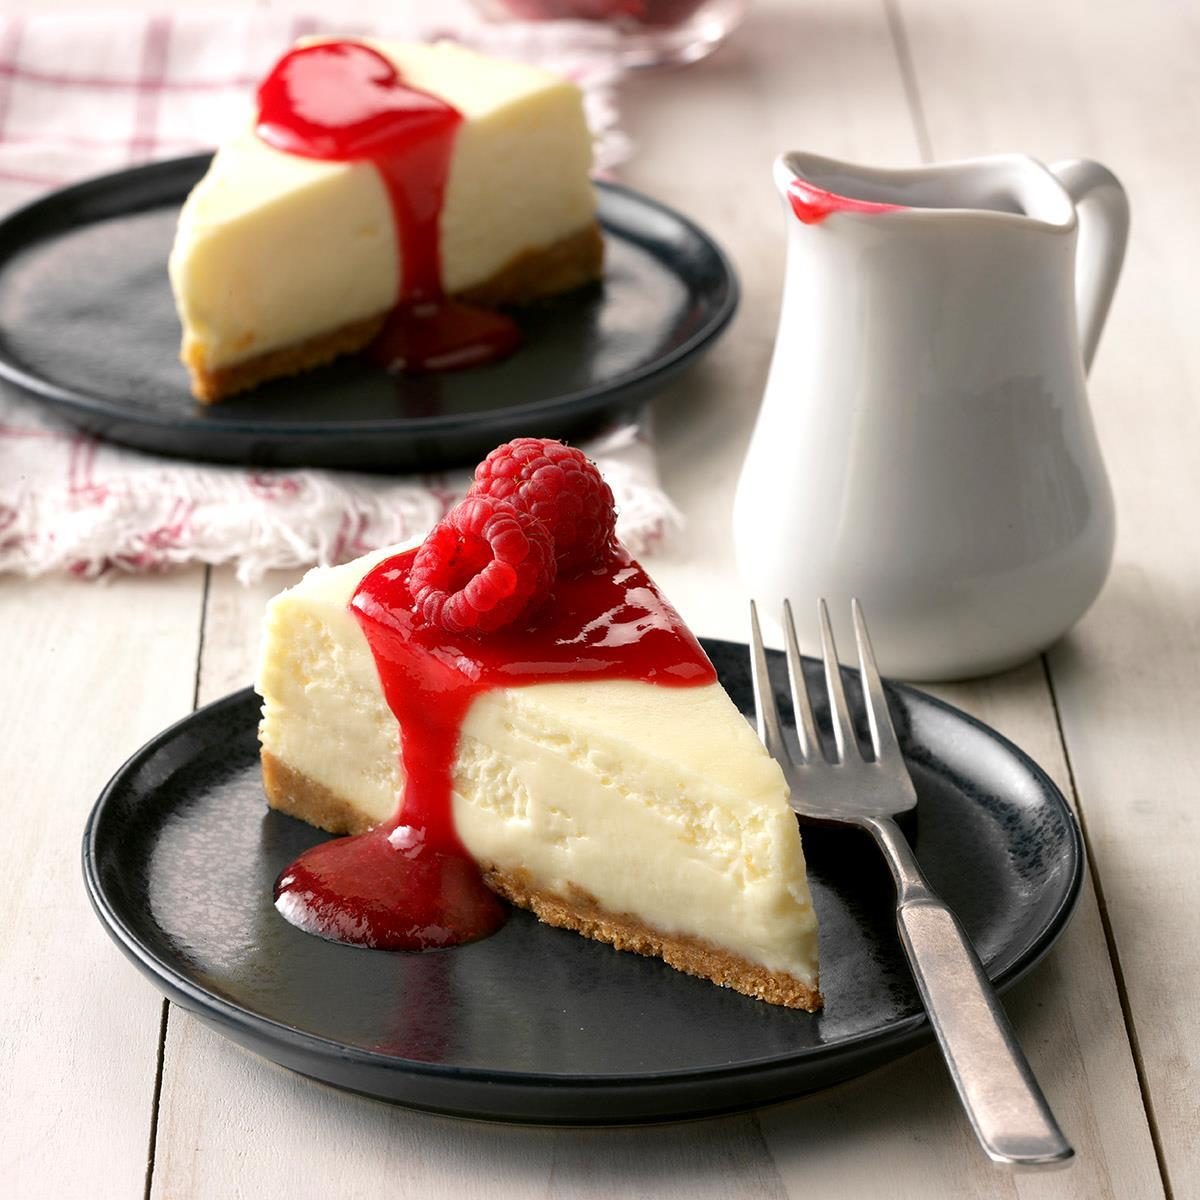 Traditional Cheesecake Recipe | Taste of Home